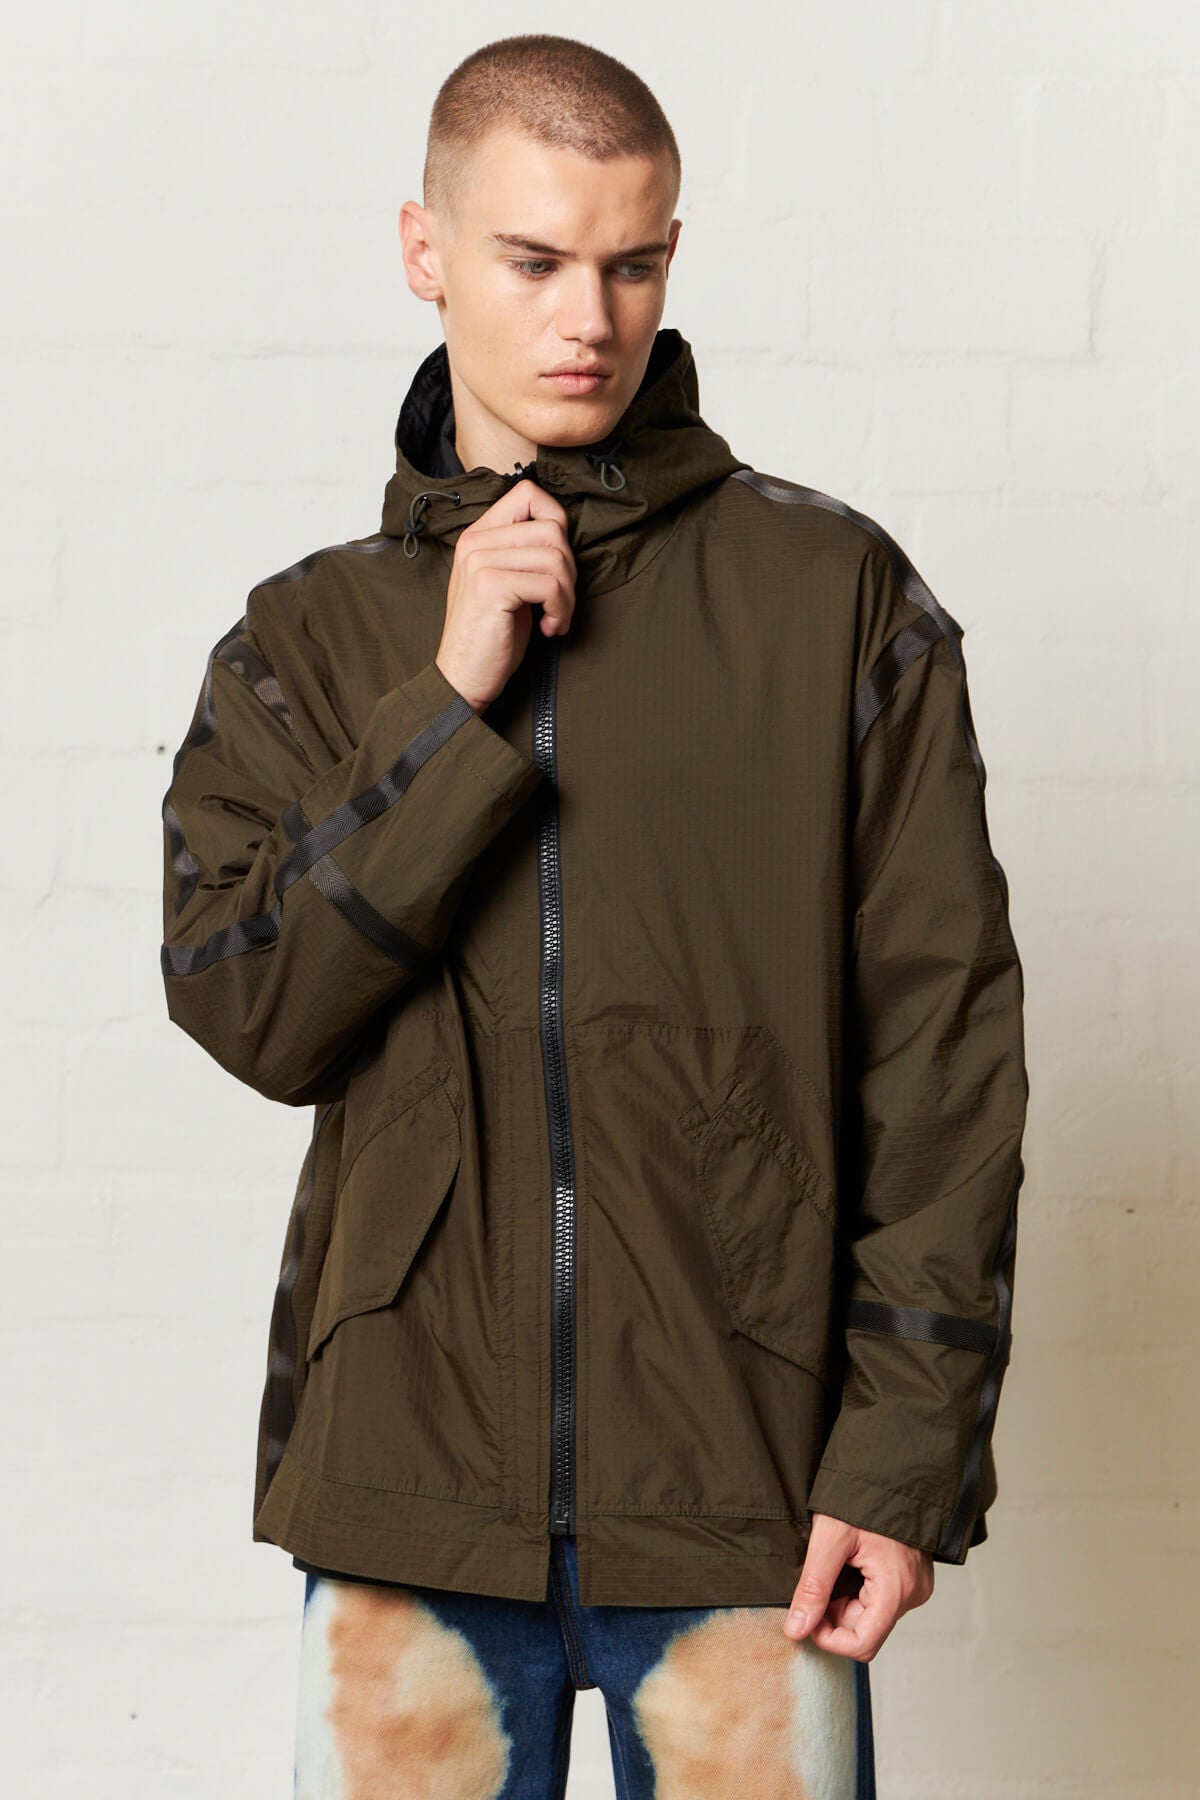 Norse Store  Shipping Worldwide - Our Legacy Introspec Reversible Jacket -  Army Green